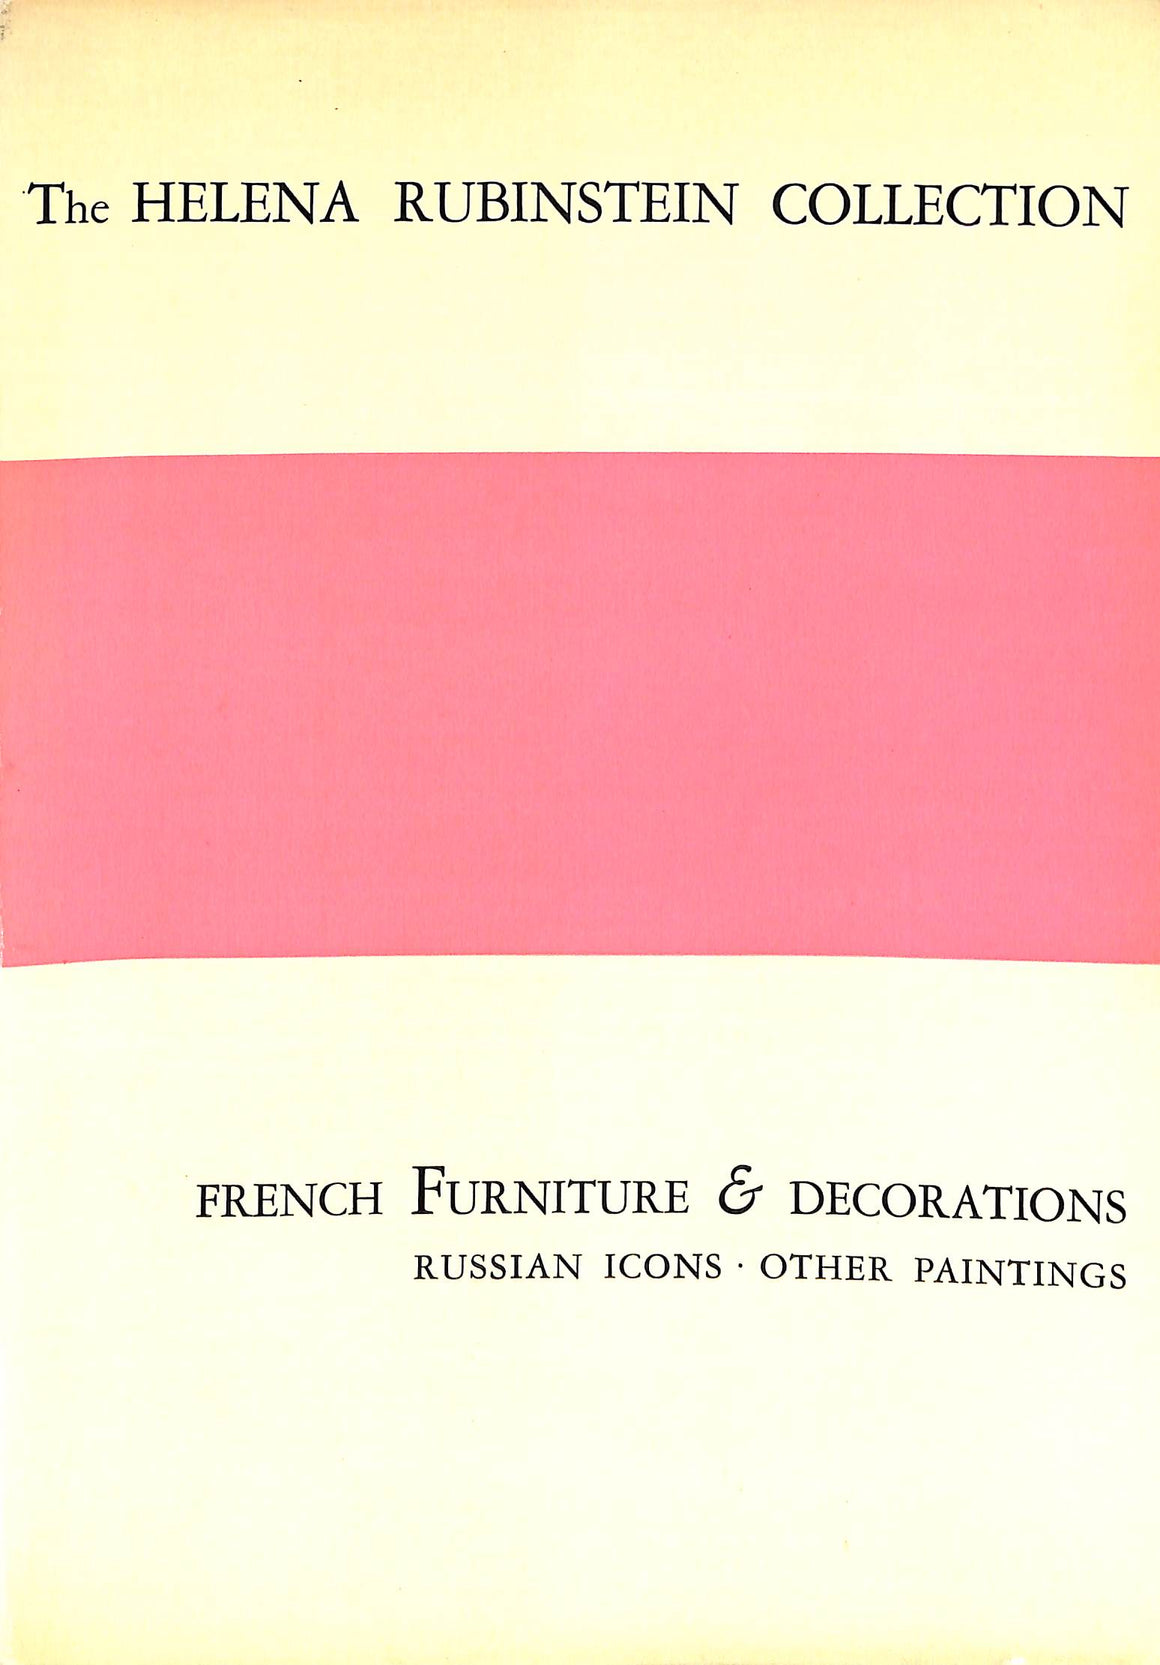 "The Helena Rubinstein Collection: French Furniture & Decorations Russian Icons" 1966